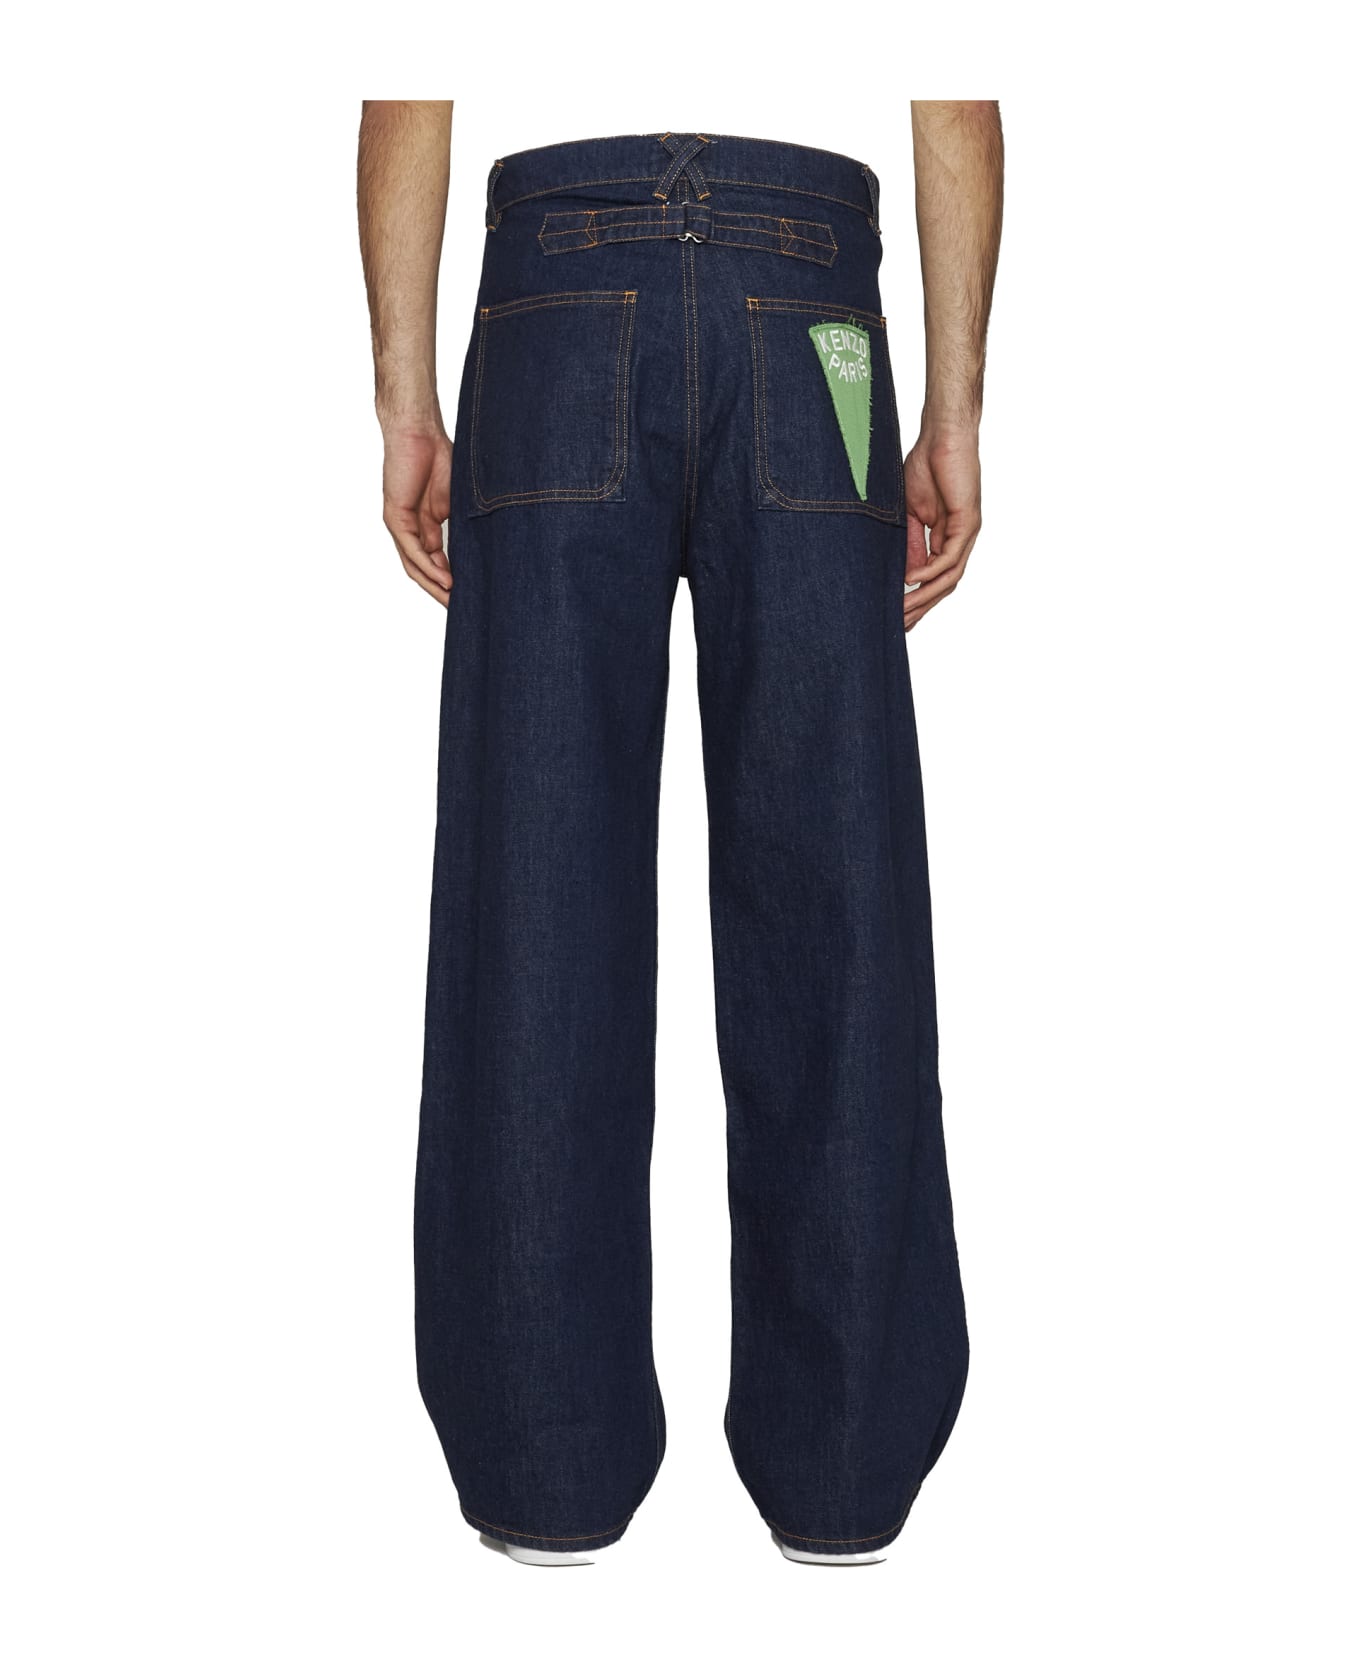 Kenzo Loose Fit Jeans - Rinse blue